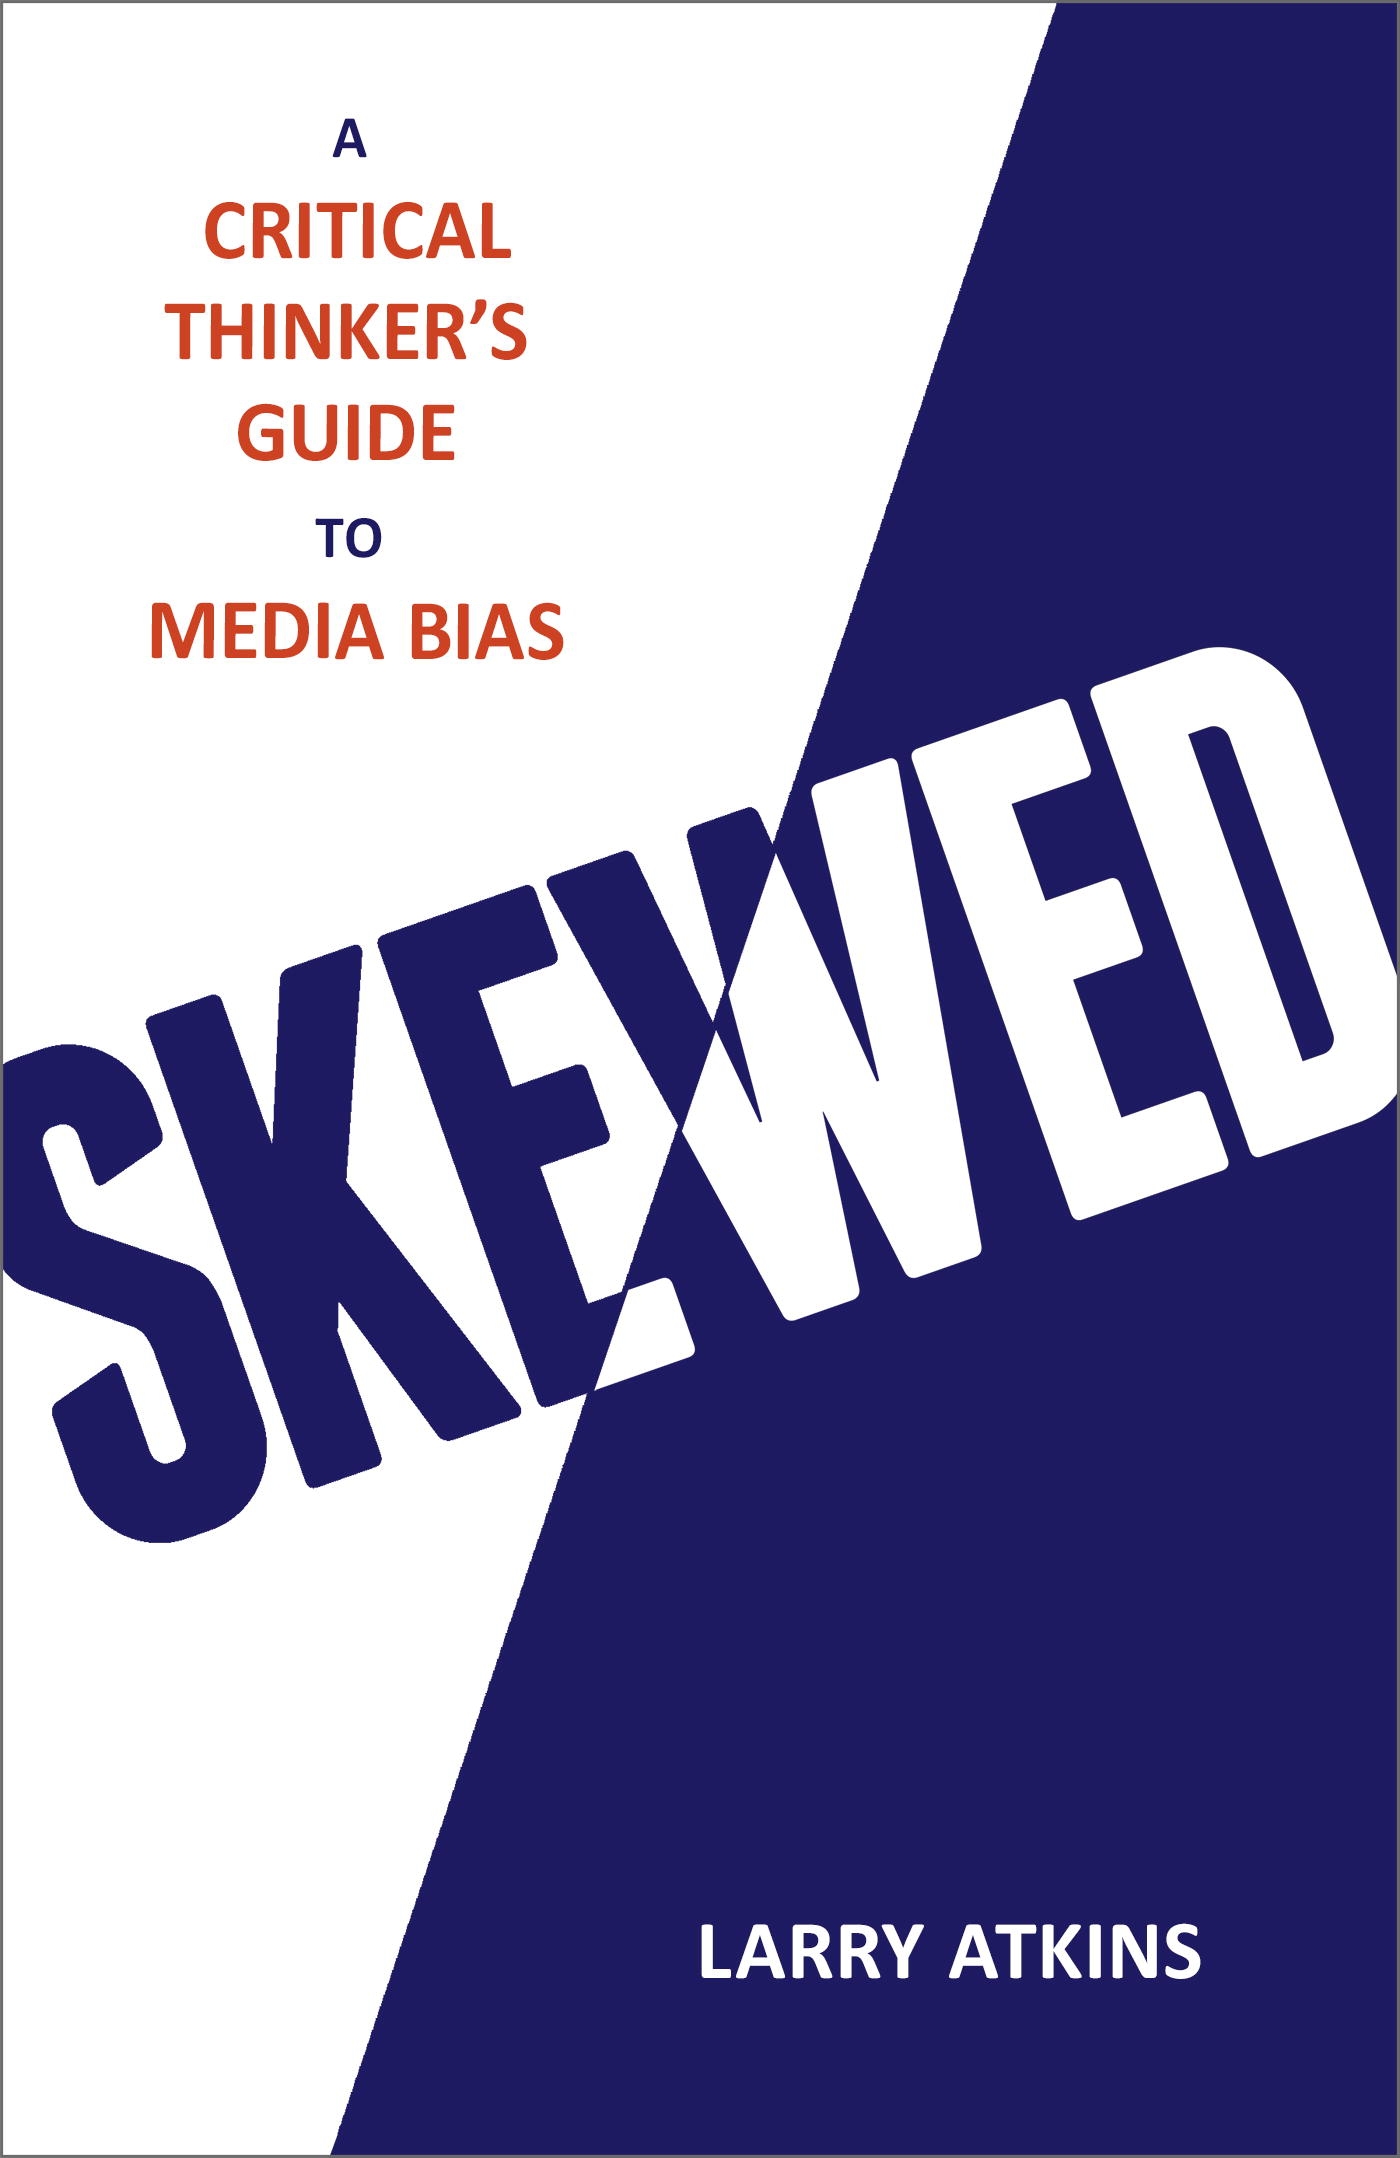 Skewed: A Critical Thinker's Guide to Media Bias